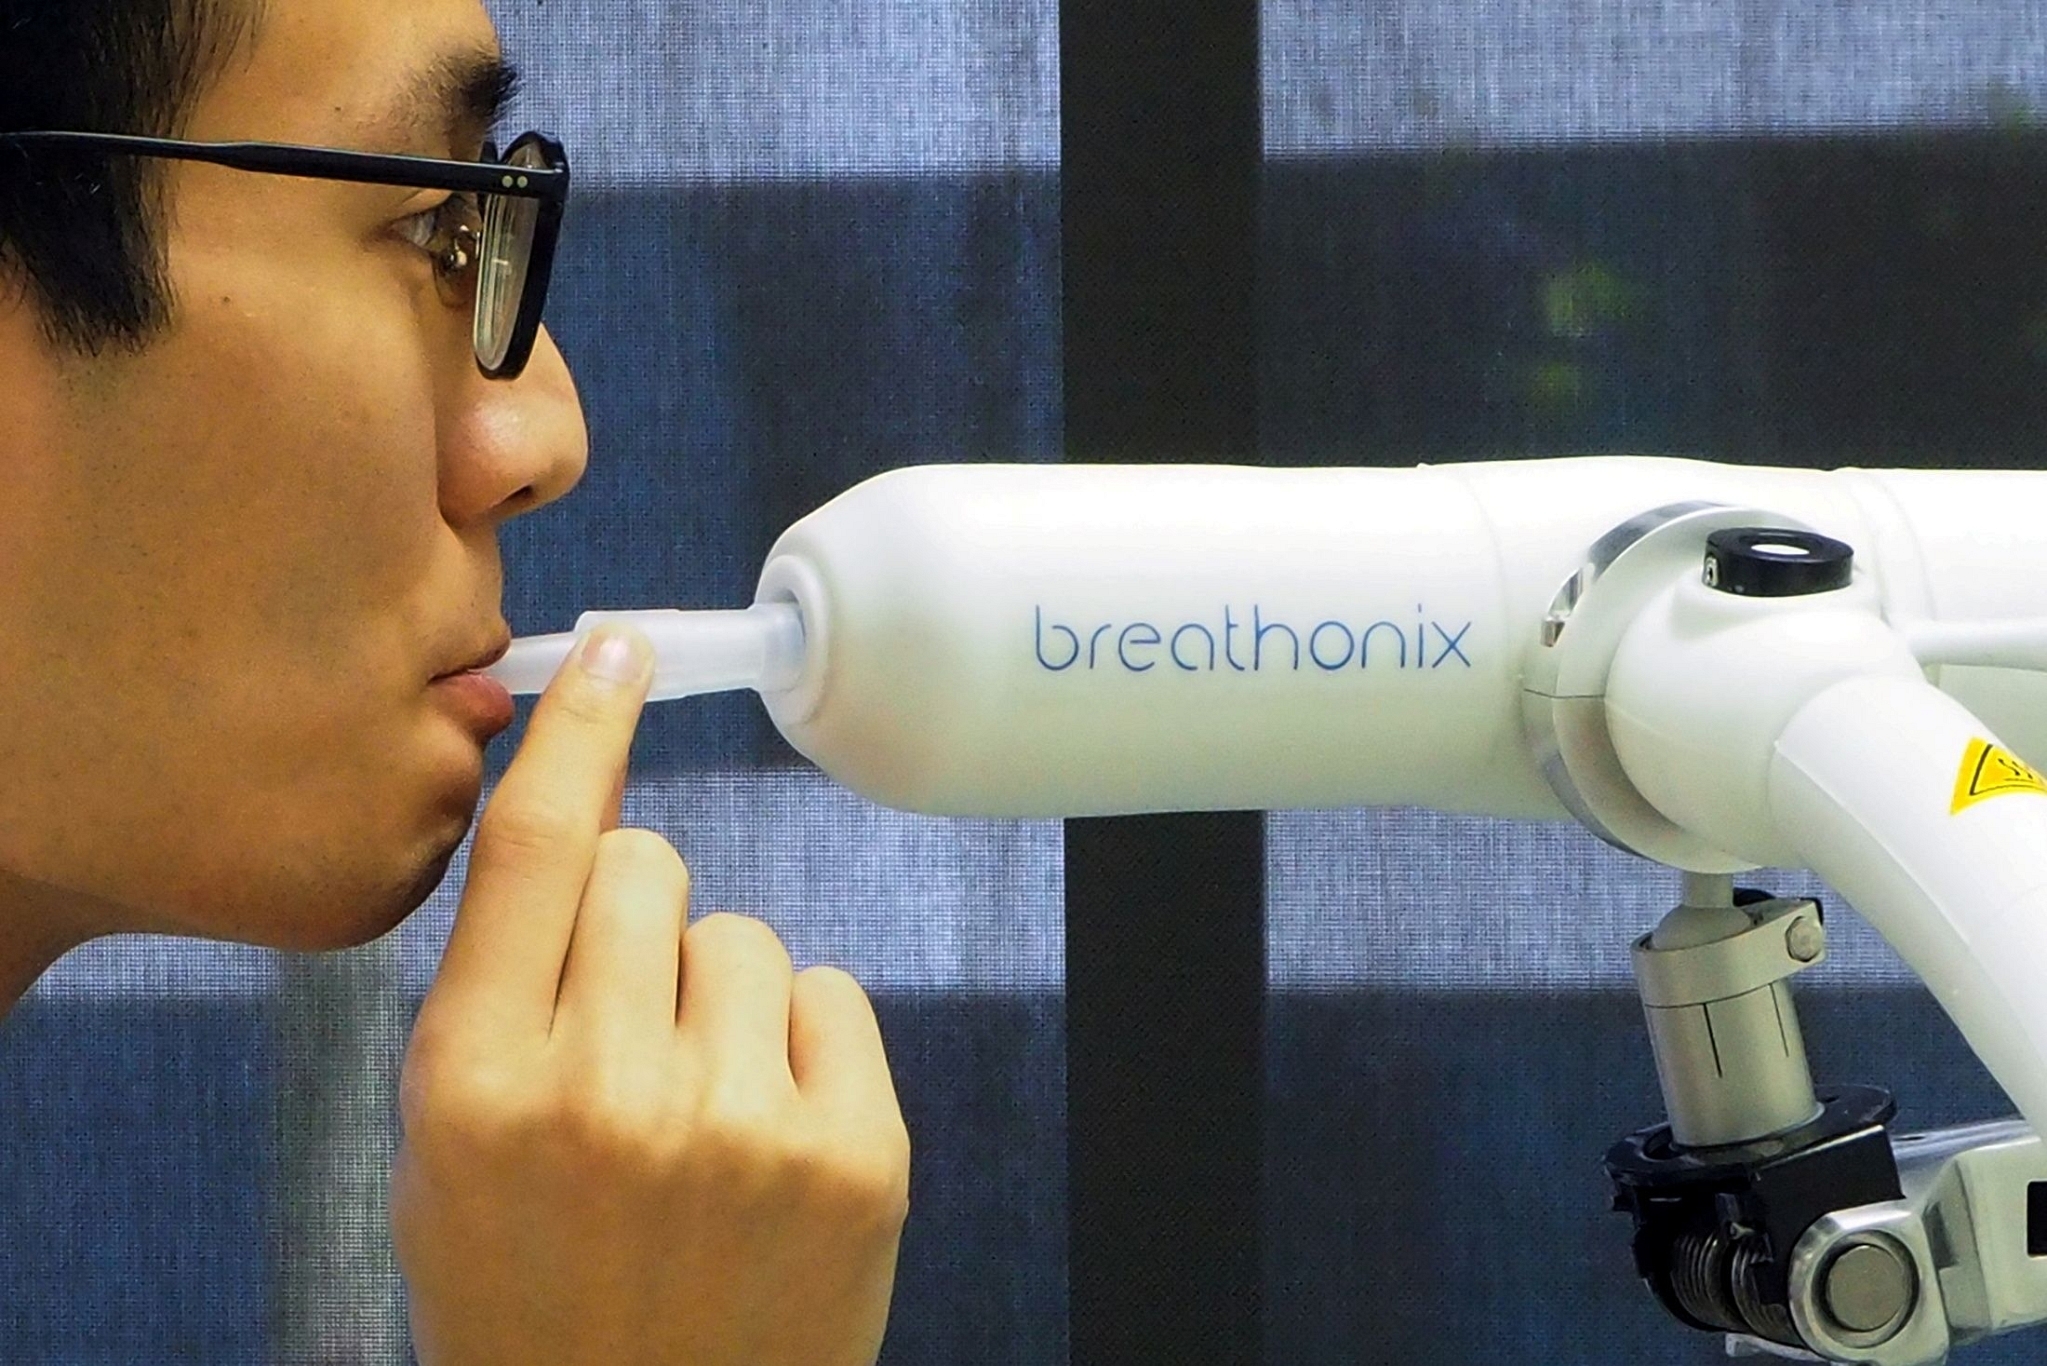 The breath analysis system 